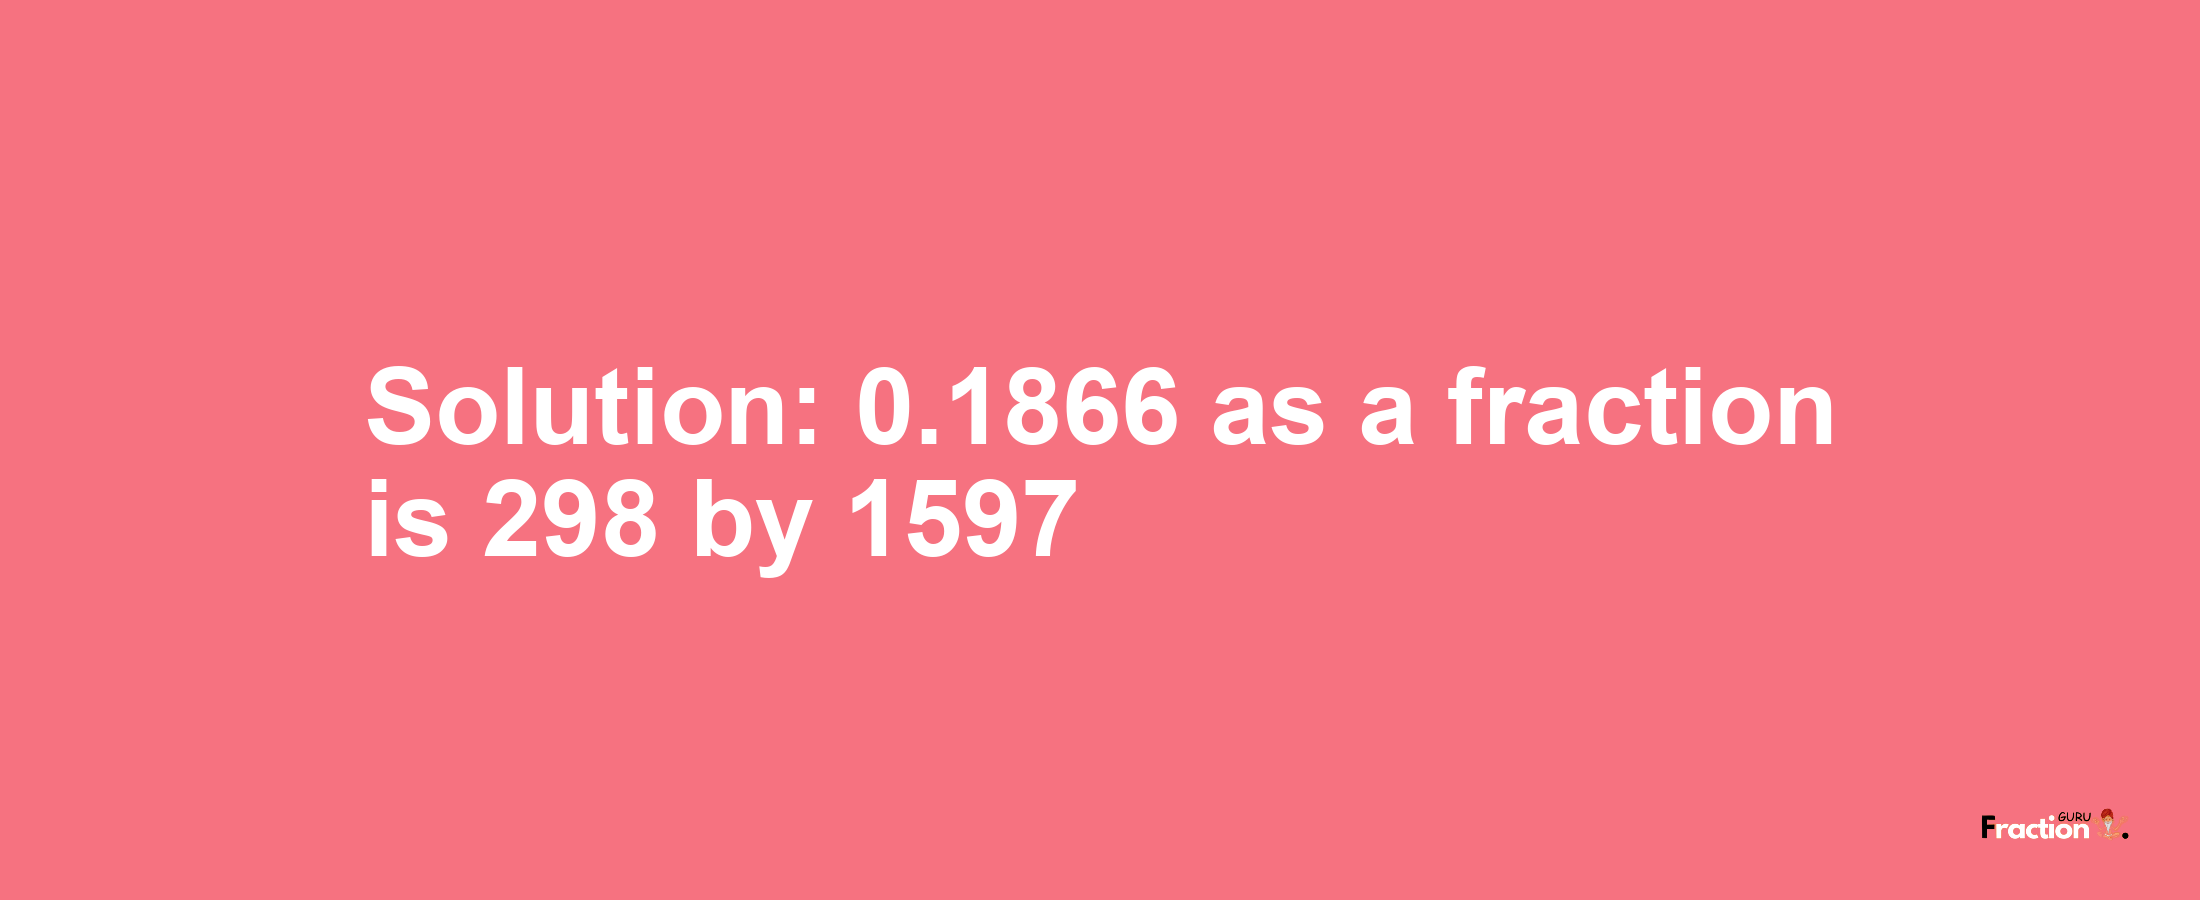 Solution:0.1866 as a fraction is 298/1597